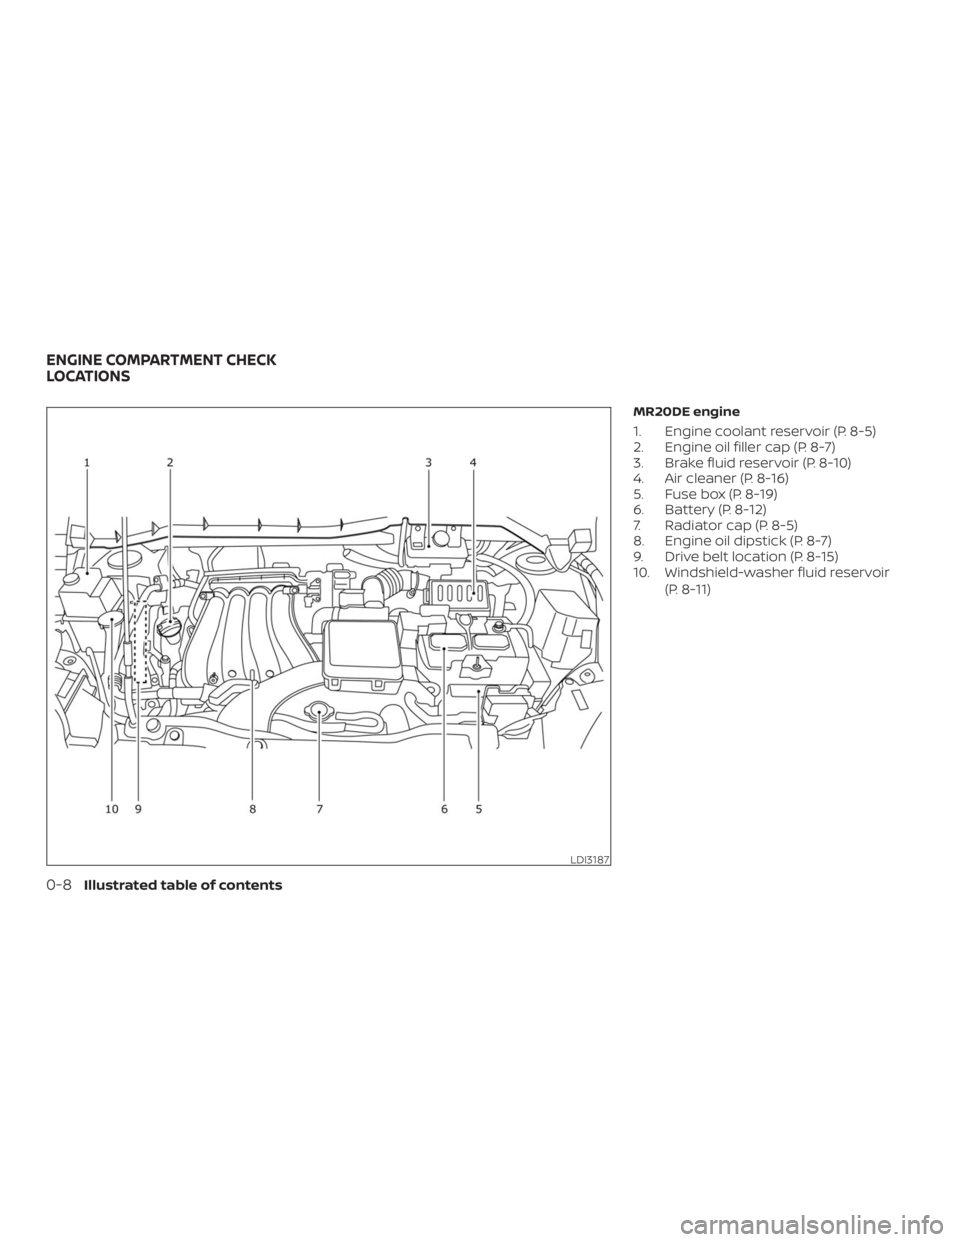 NISSAN NV200 2019  Owners Manual LDI3187
ENGINE COMPARTMENT CHECK
LOCATIONS 